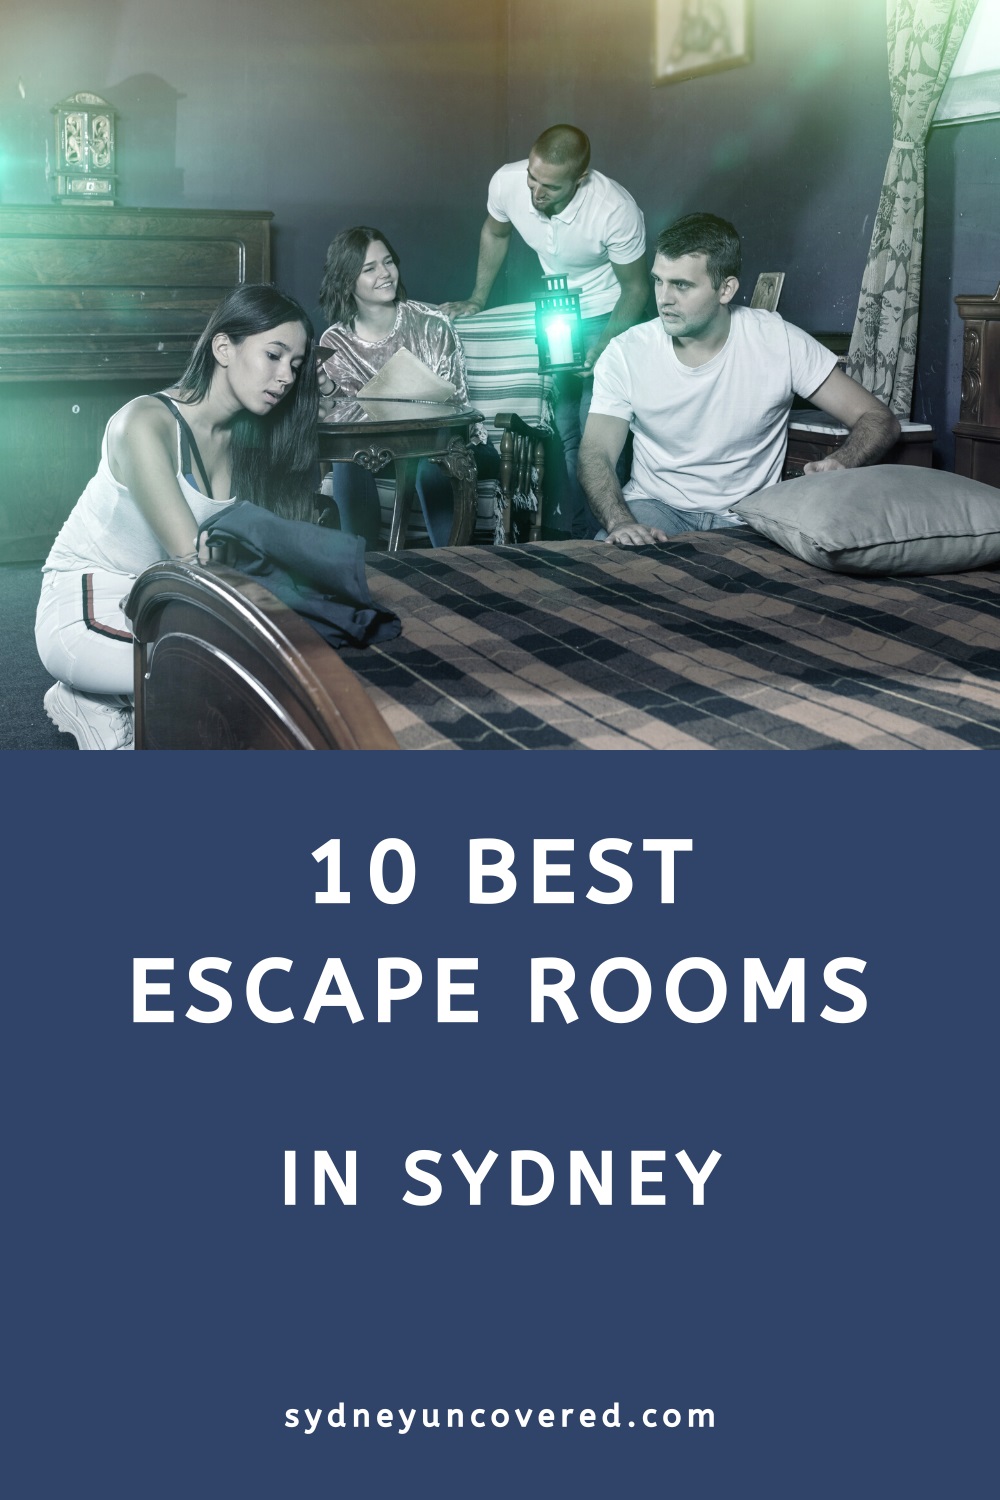 10 Best escape rooms in Sydney